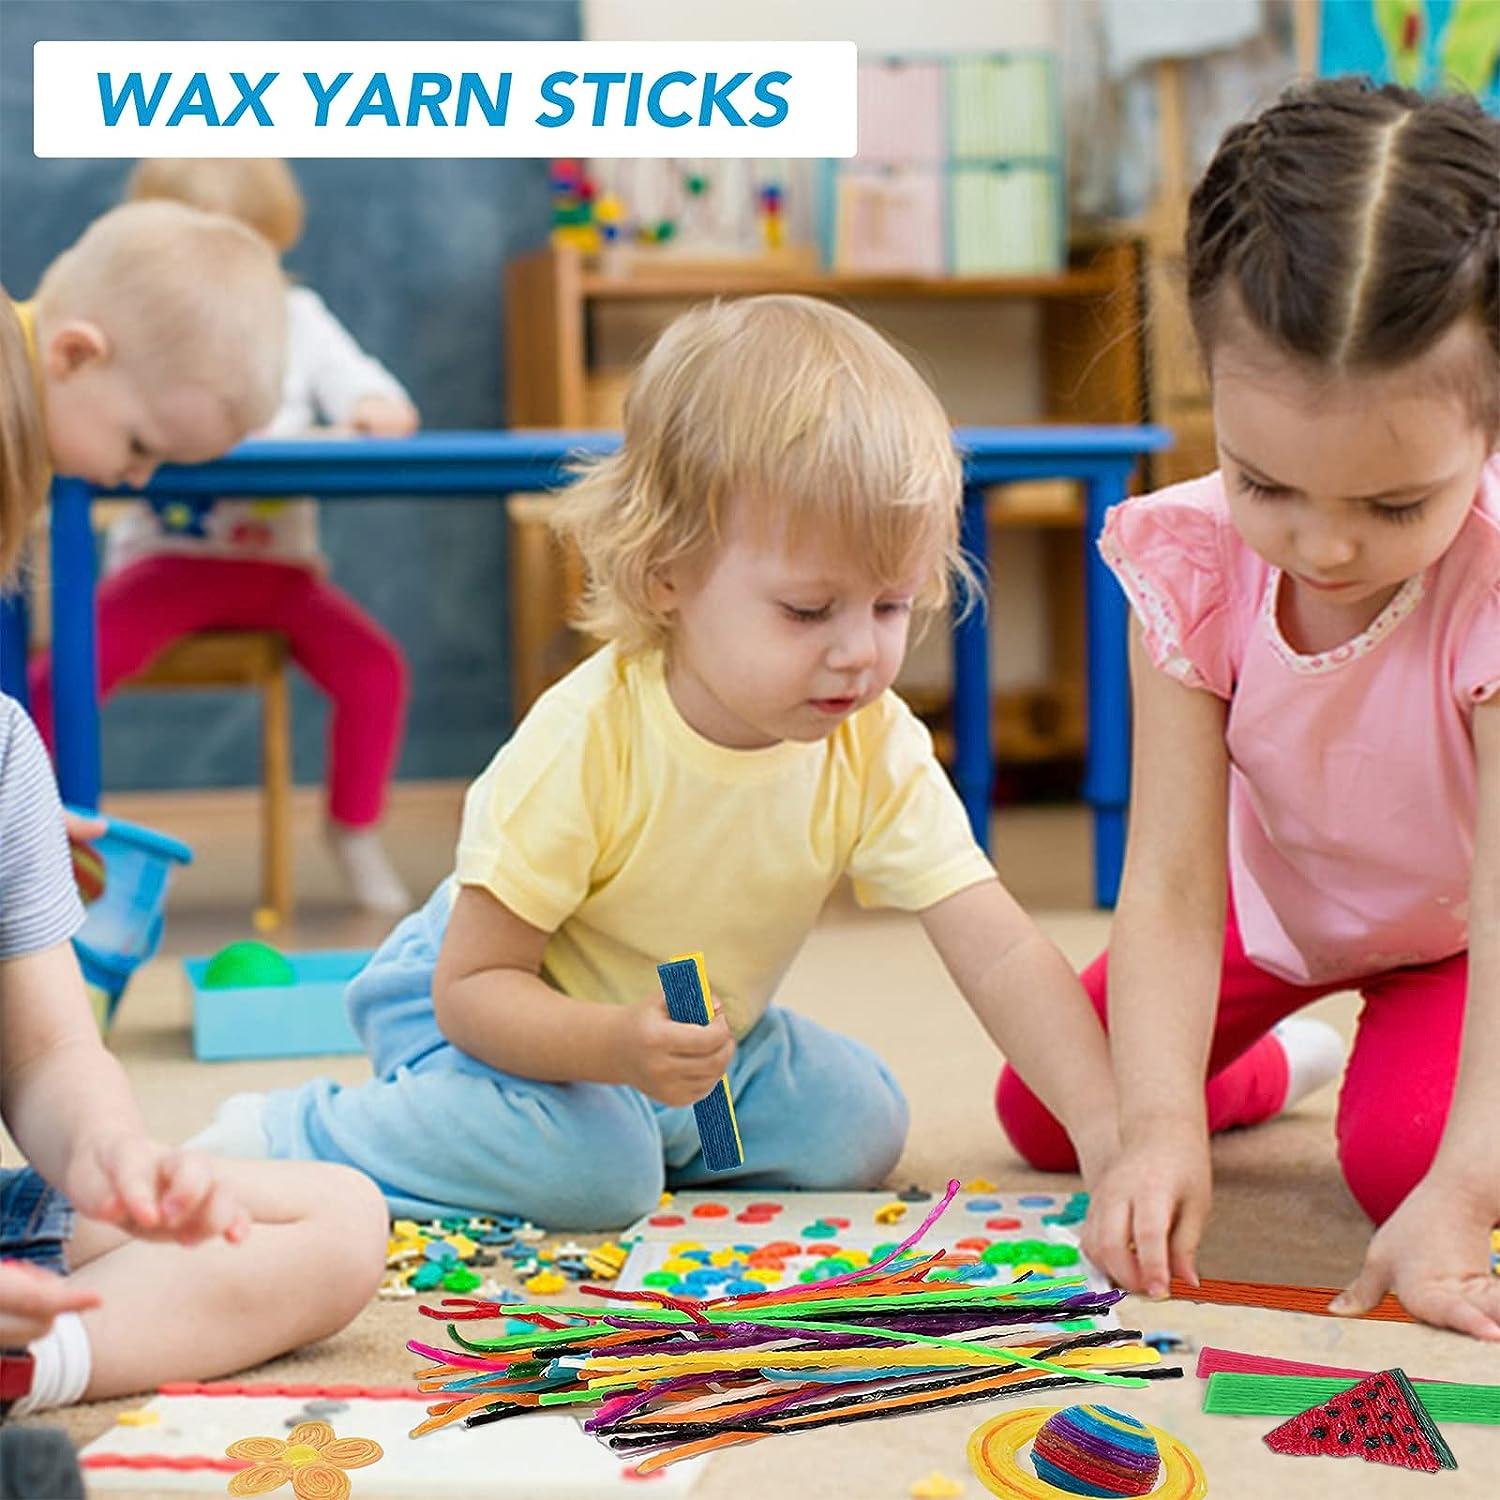 Wax Craft Sticks for Kids, Bendable Sticky Wax Yarn,Non-Toxic  Adible，Reusable Molding and Sculpting Sticks，DIY Arts Activity for Travel  or at Home (60